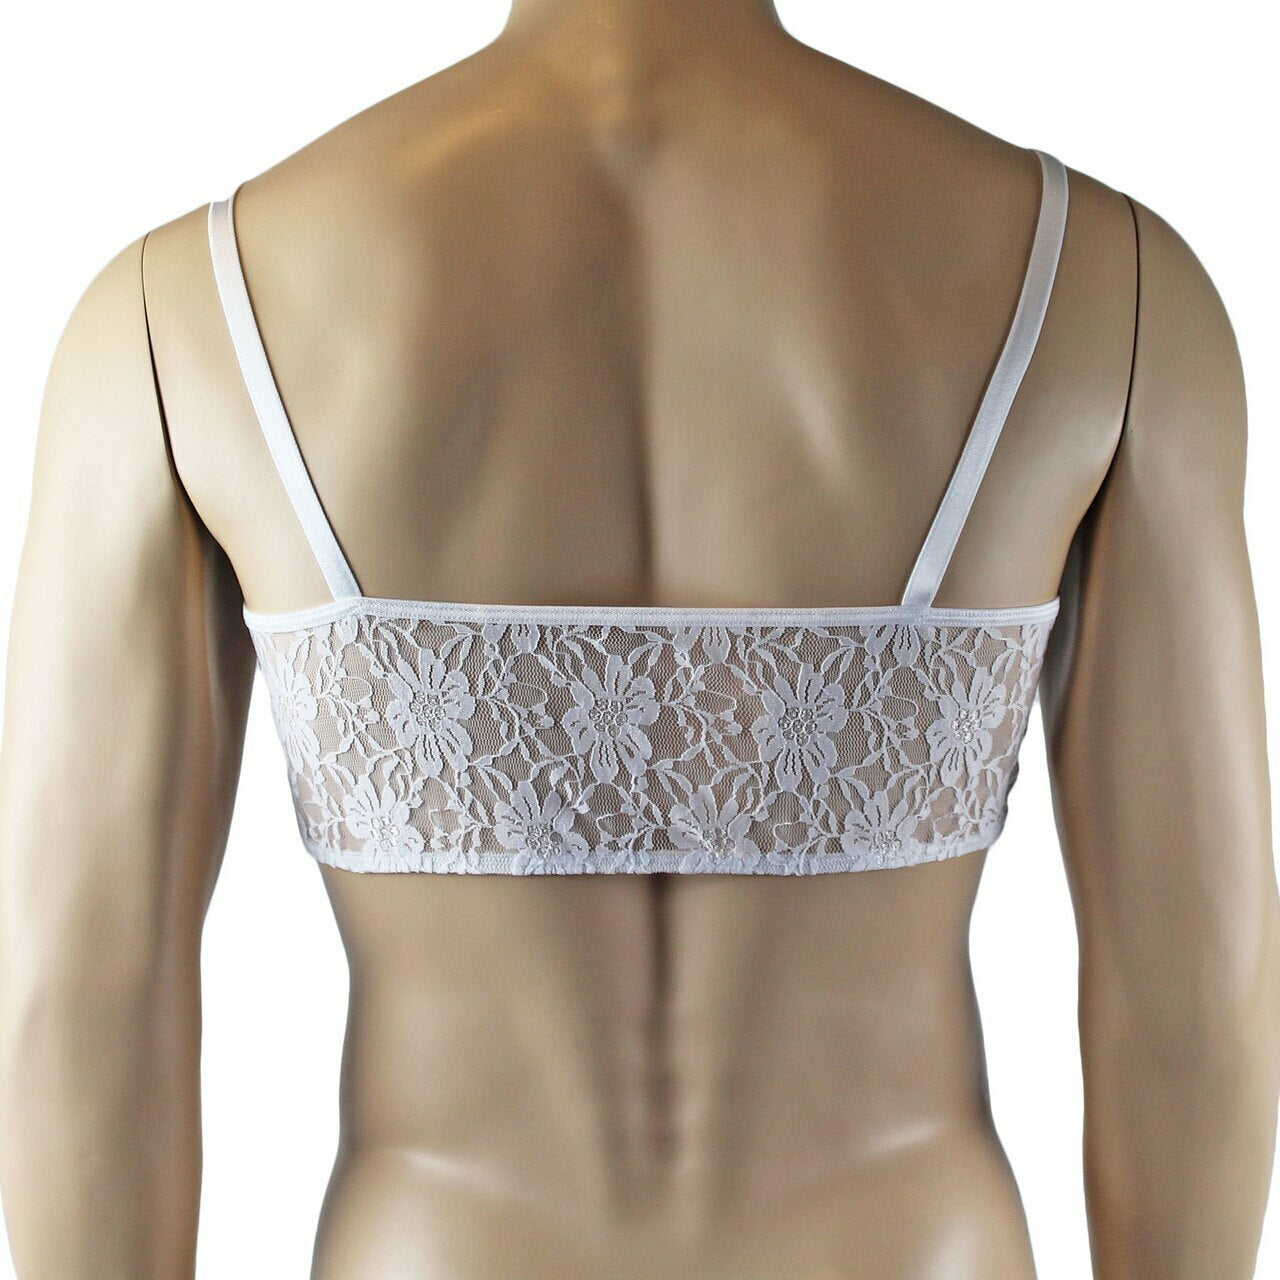 Mens Sexy Lace Crop Bra Top Camisole and Male Lingerie G string White